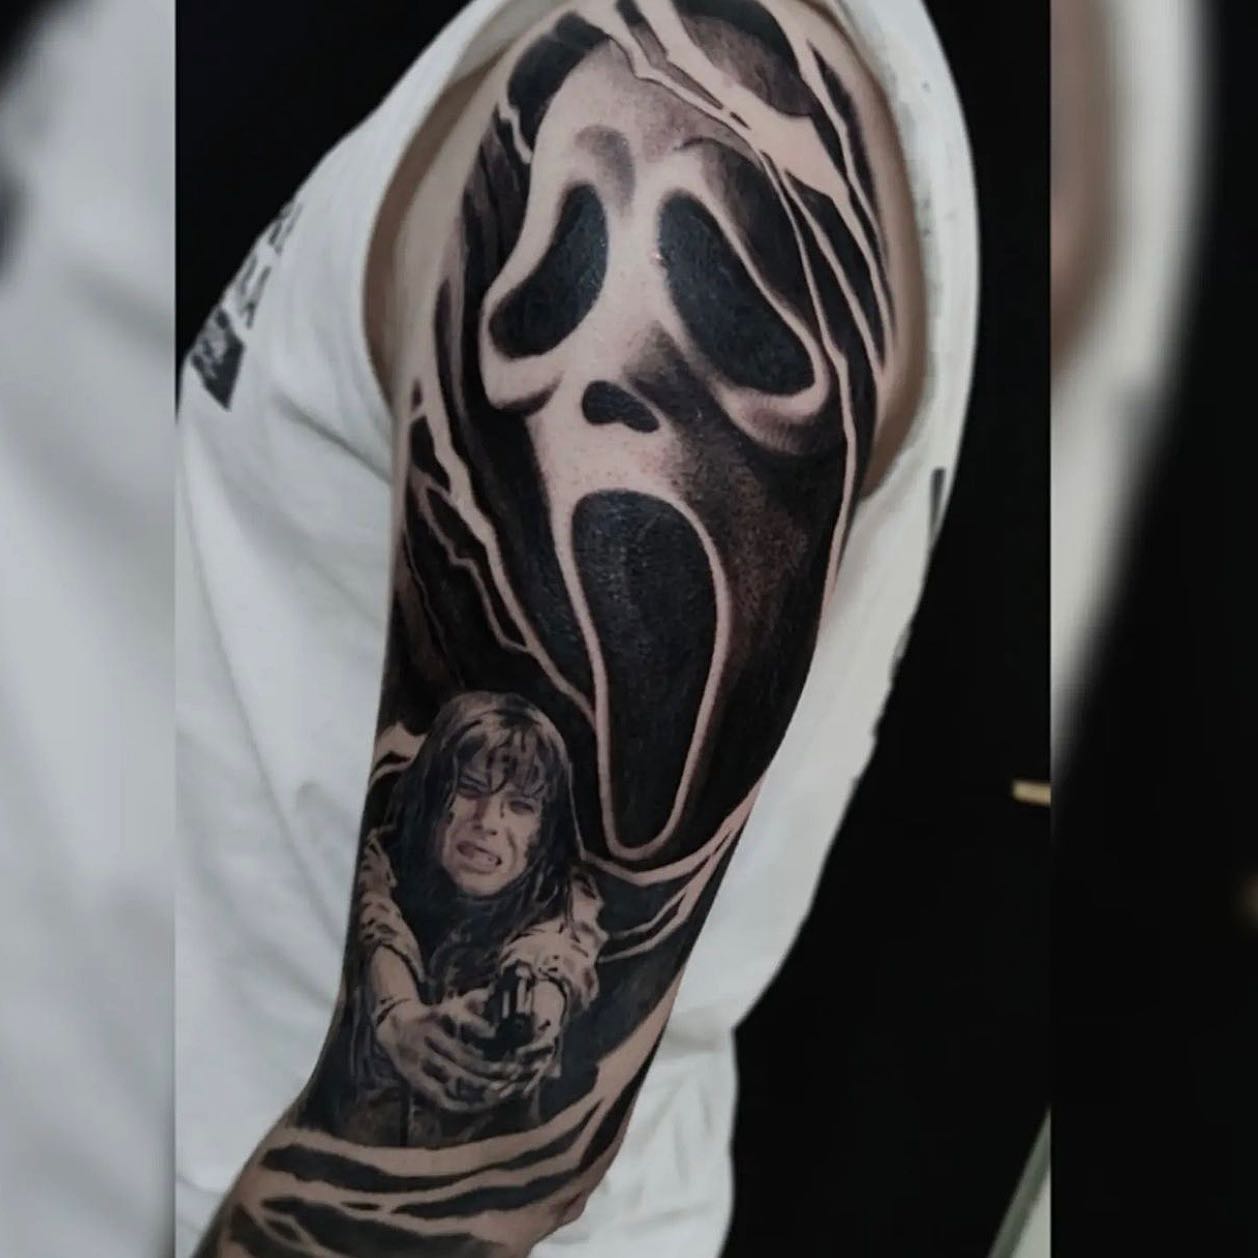 Scream piece by our resident Eme 👻💫

📲 emilianoemetattoo 

If you would like to get tattooed by Eme, then please message him directly. Otherwise you can fill in the tattoo enquiry form on our website ✨

                        barber_dts easytattoo_uk eternalink dynamiccolor lockdownneedle stencilstuff        